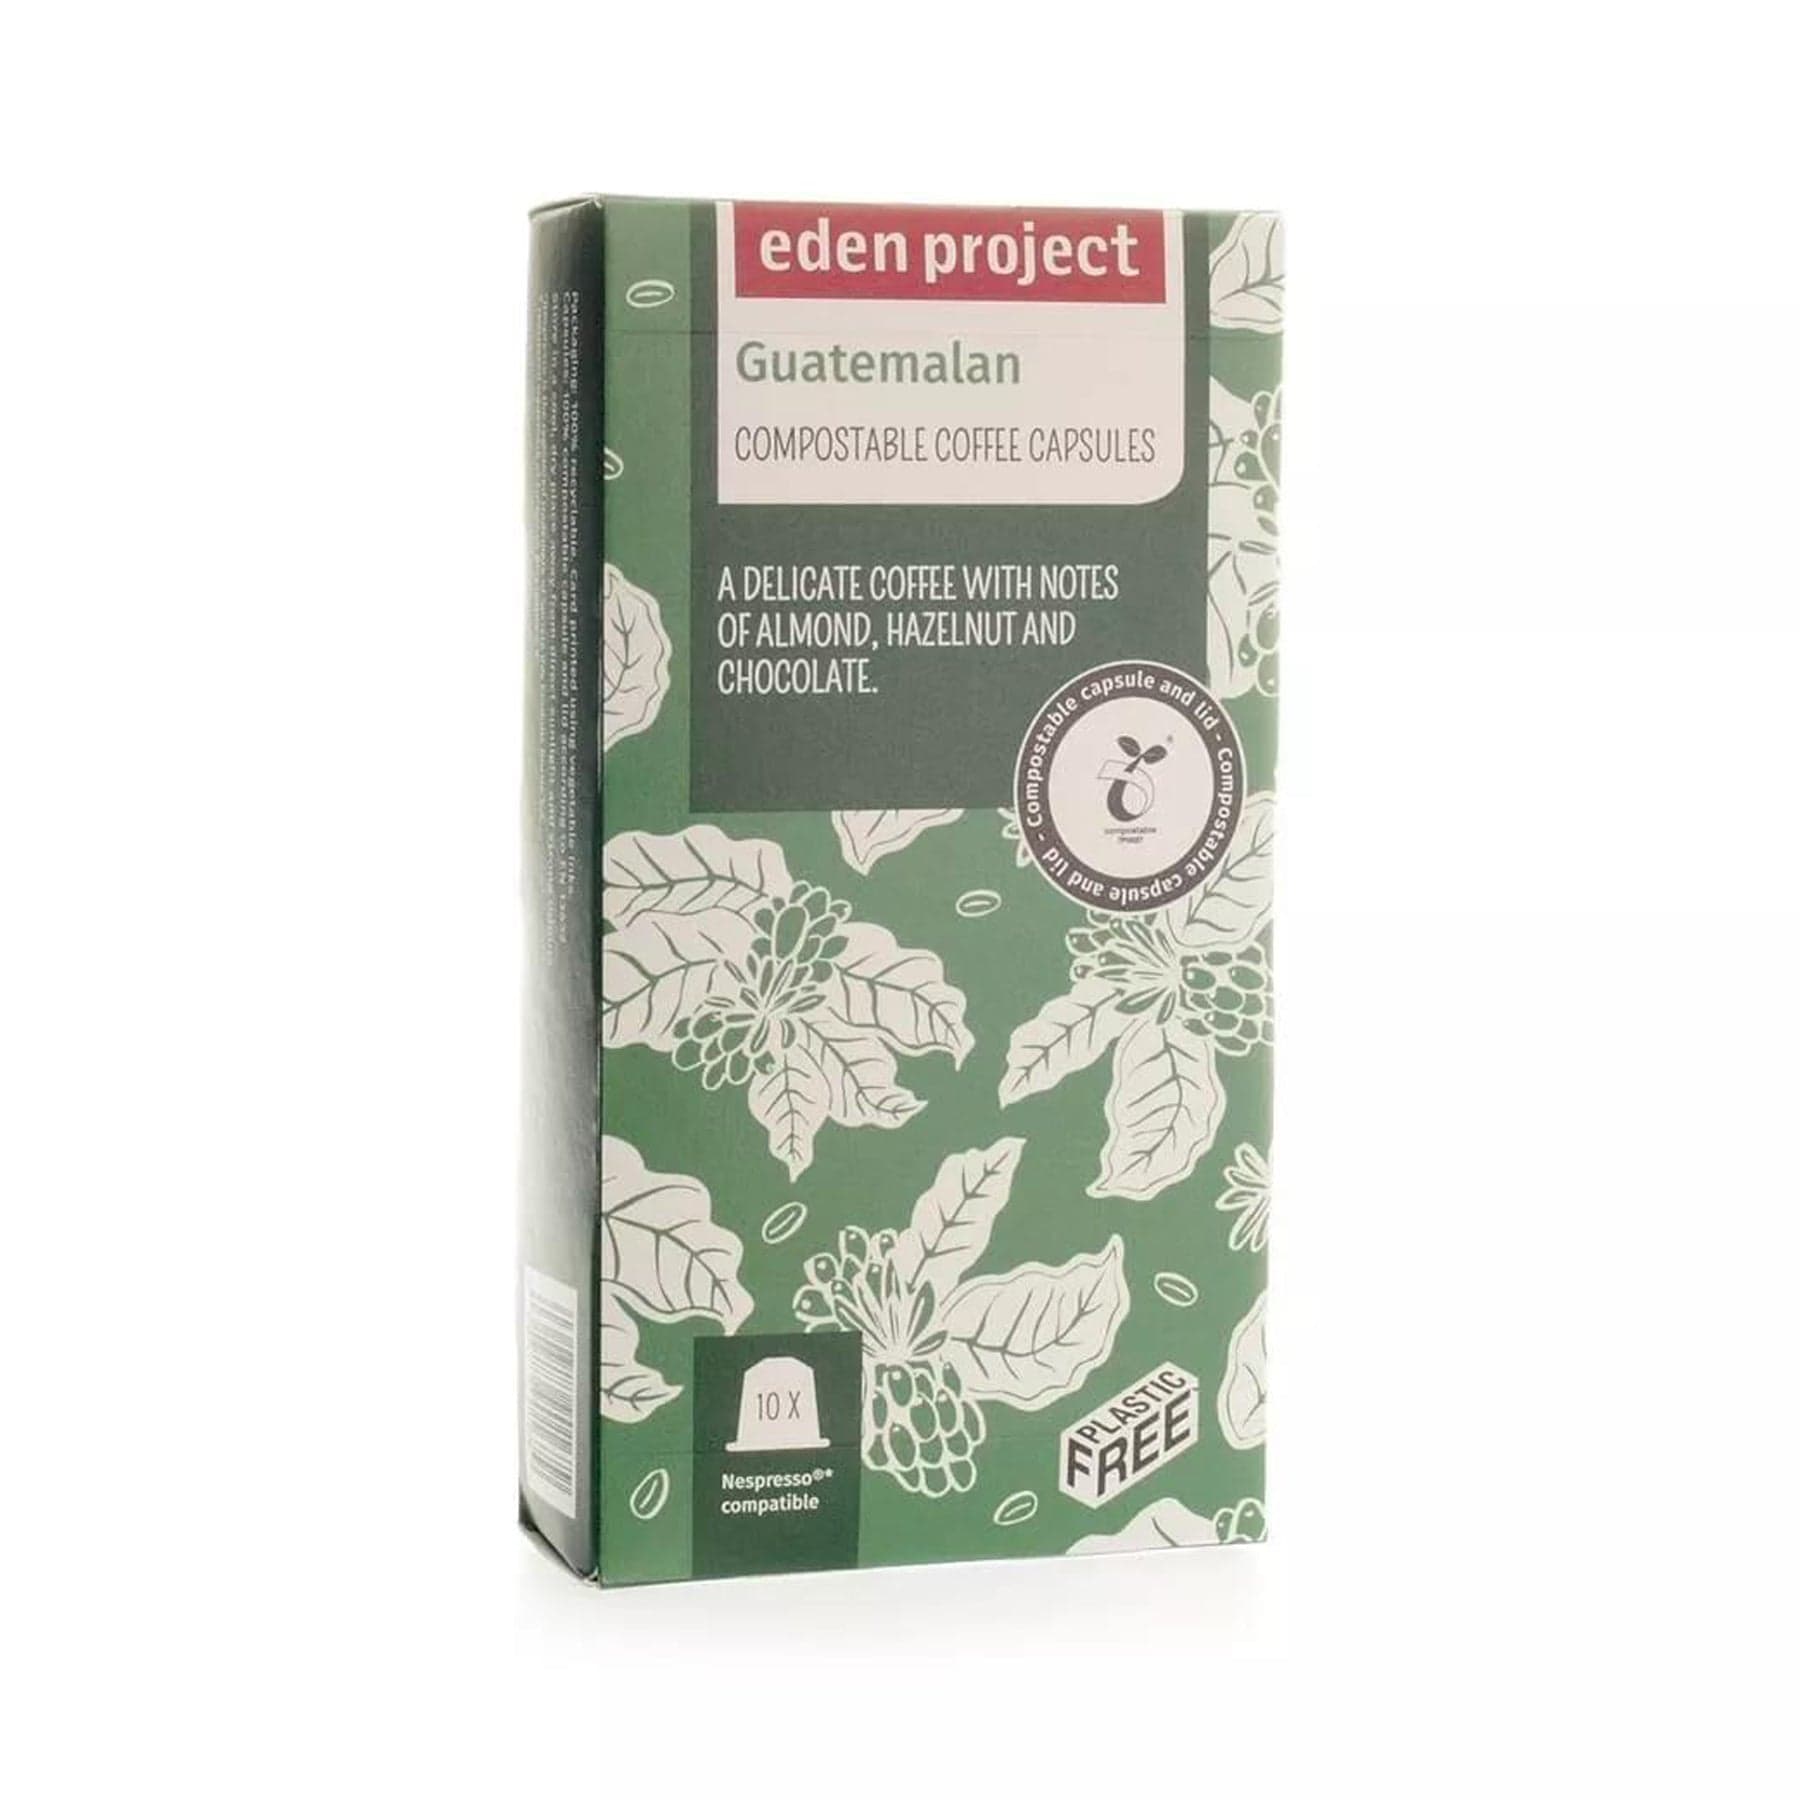 Alt text: Eden Project branded Guatemalan compostable coffee capsules packaging with green leafy design, indicating almond, hazelnut, and chocolate flavors, 10 Nespresso compatible pods highlighted, plastic-free.